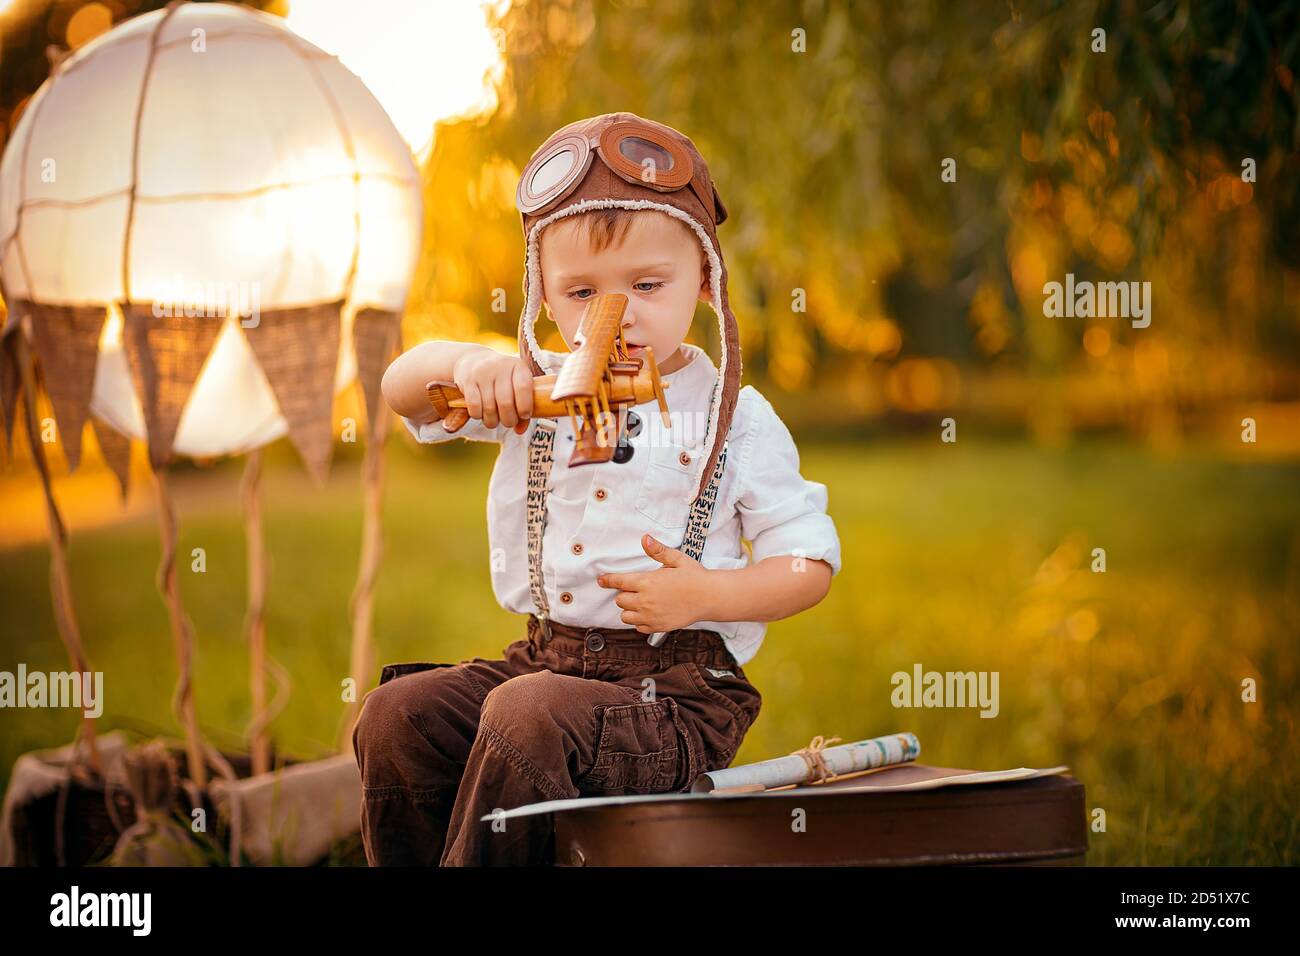 A little boy dreams of becoming a pilot. Vintage aviation hat. Stock Photo